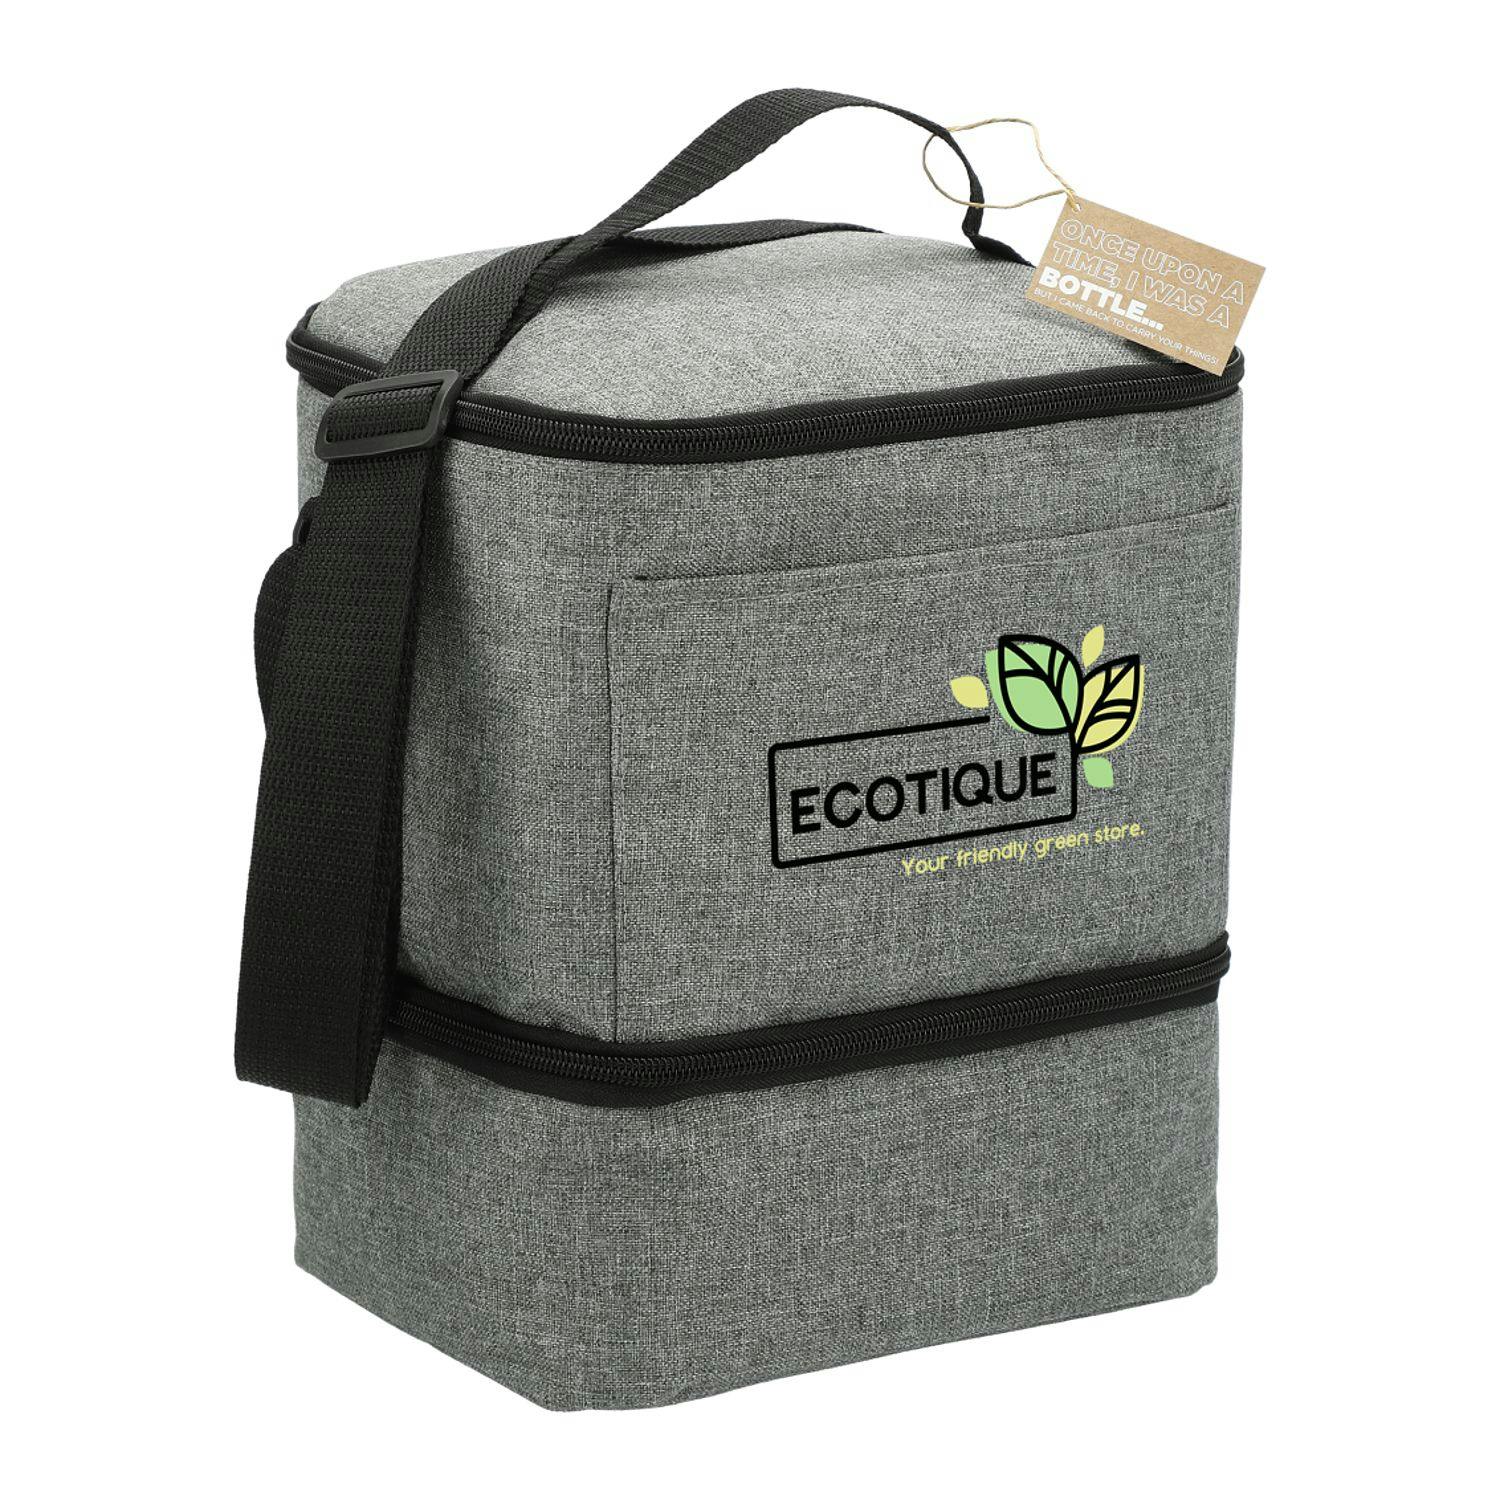 Tundra Recycled 9 Can Lunch Cooler - additional Image 1